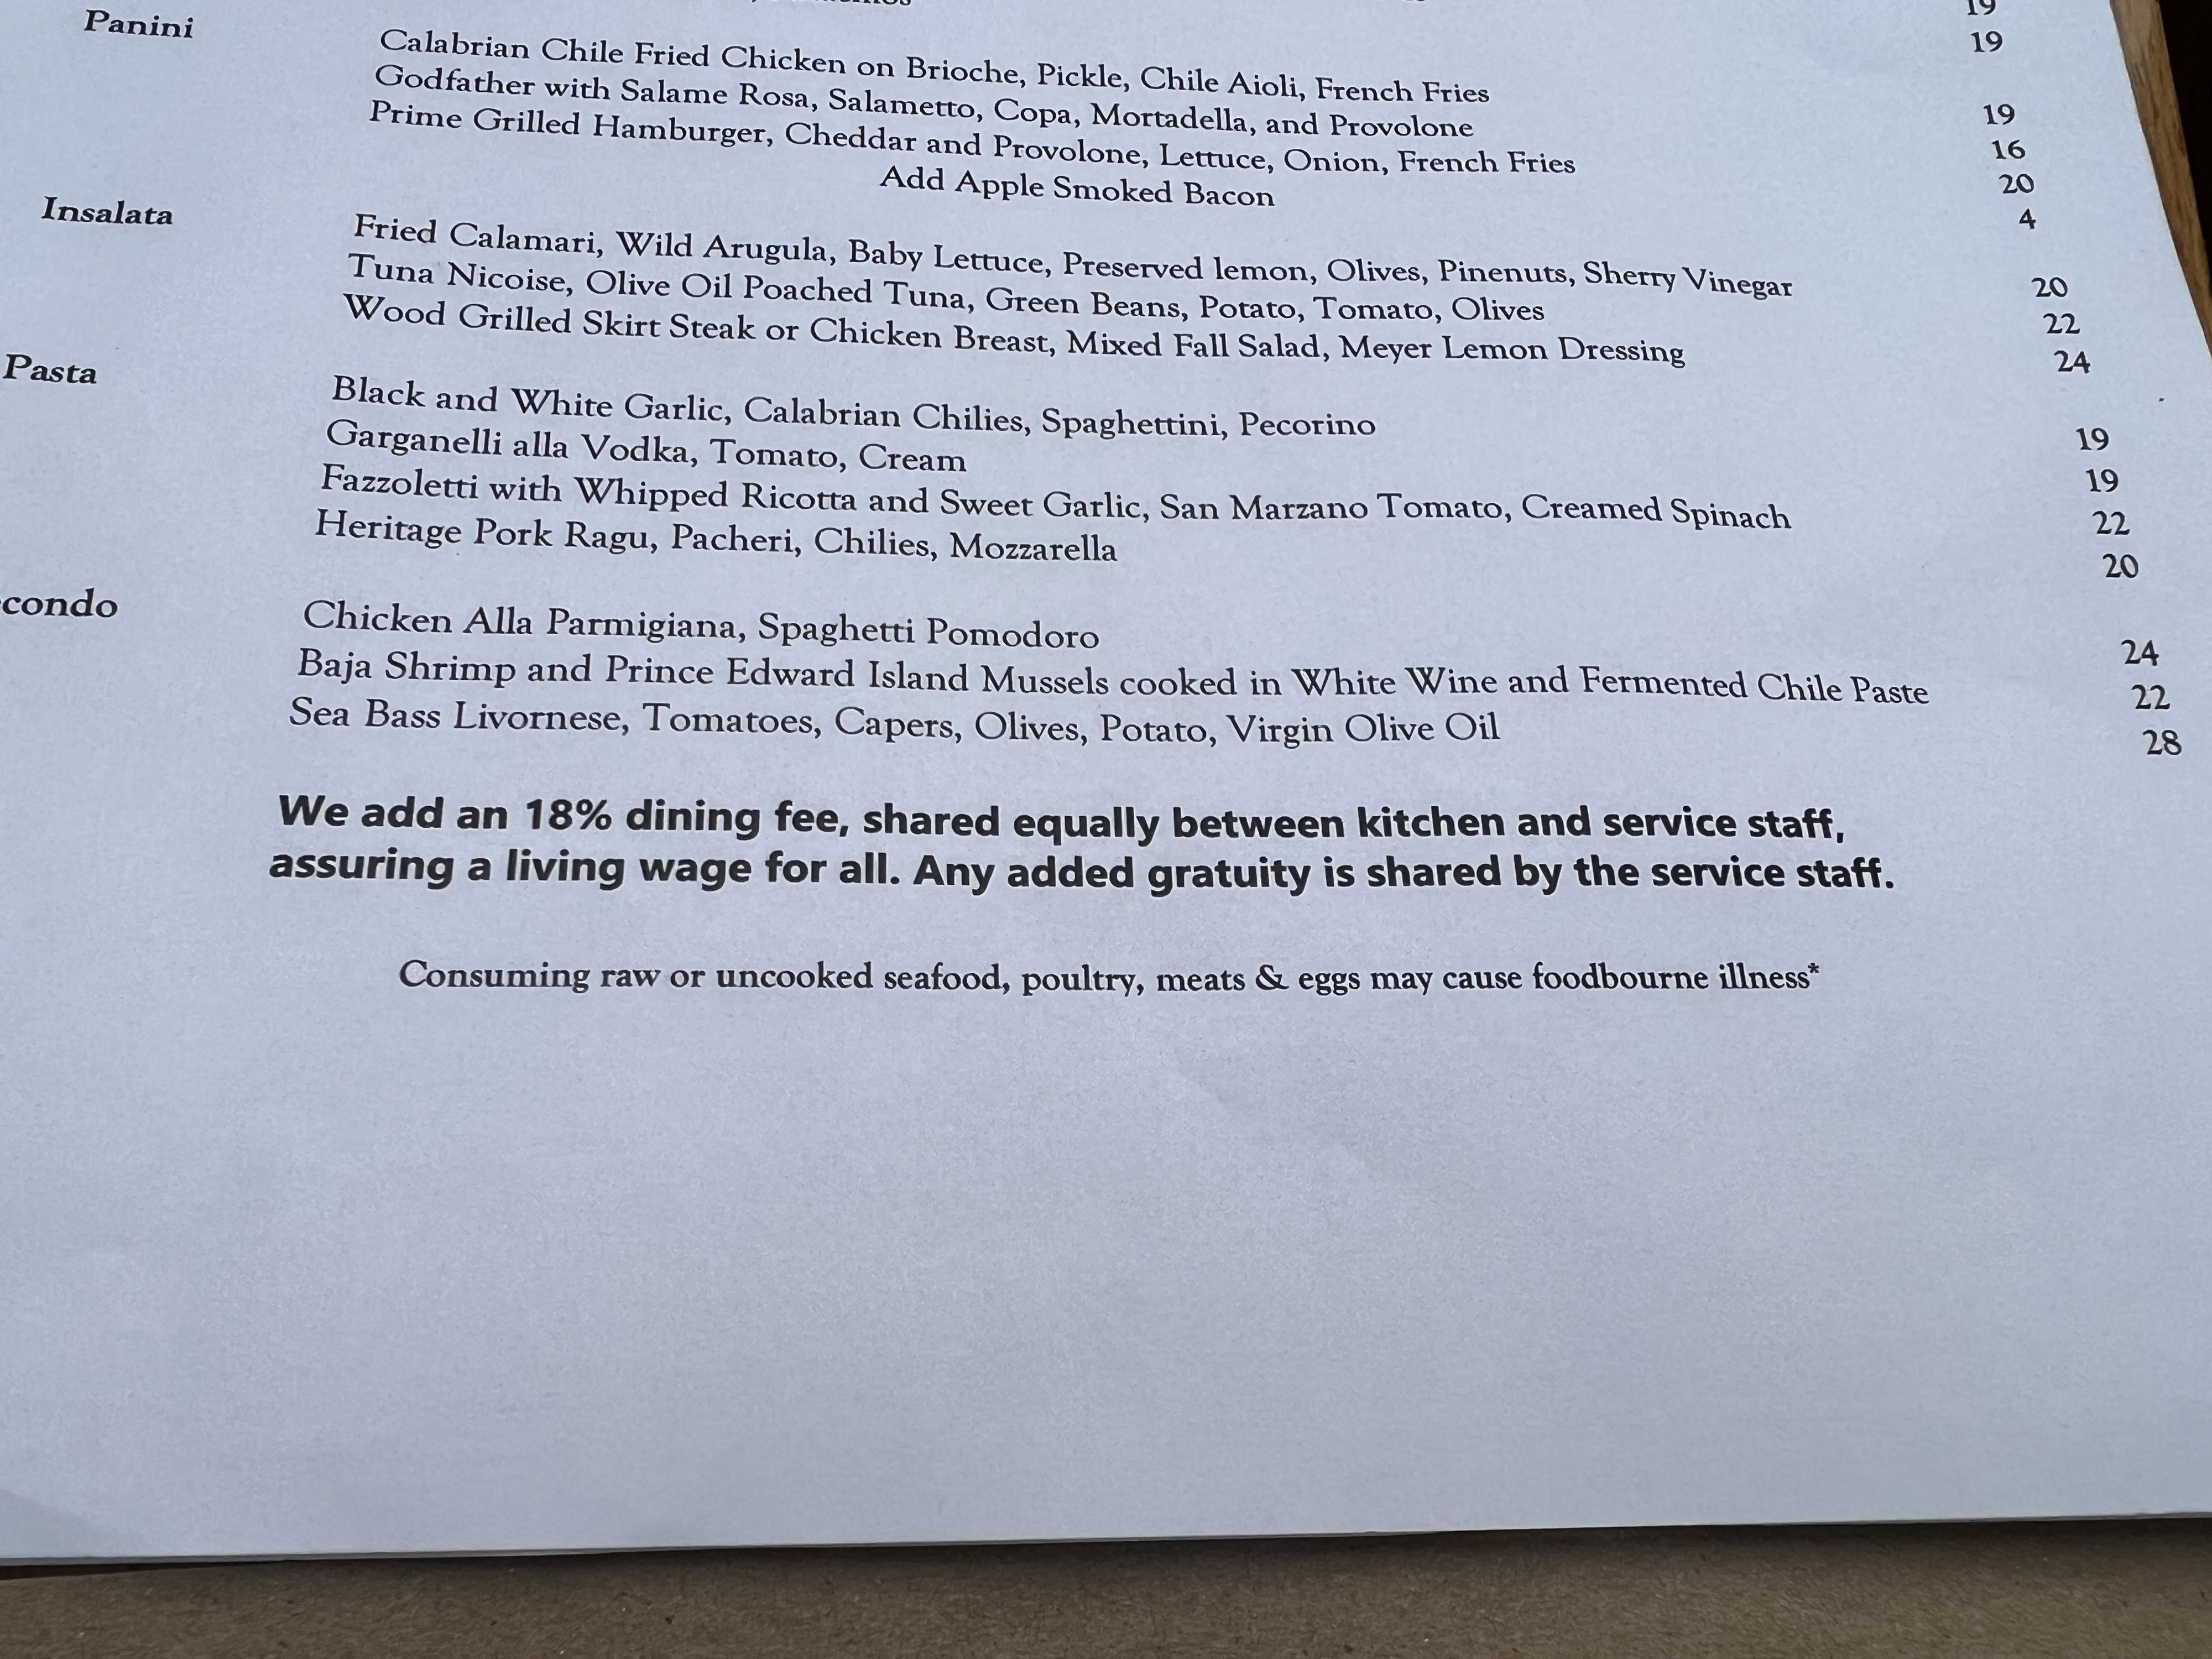 The bottom of a menu says &quot;we add an 18% dining fee, shared equally between kitchen and service staff. Any added gratuity is shared by the service staff&quot;